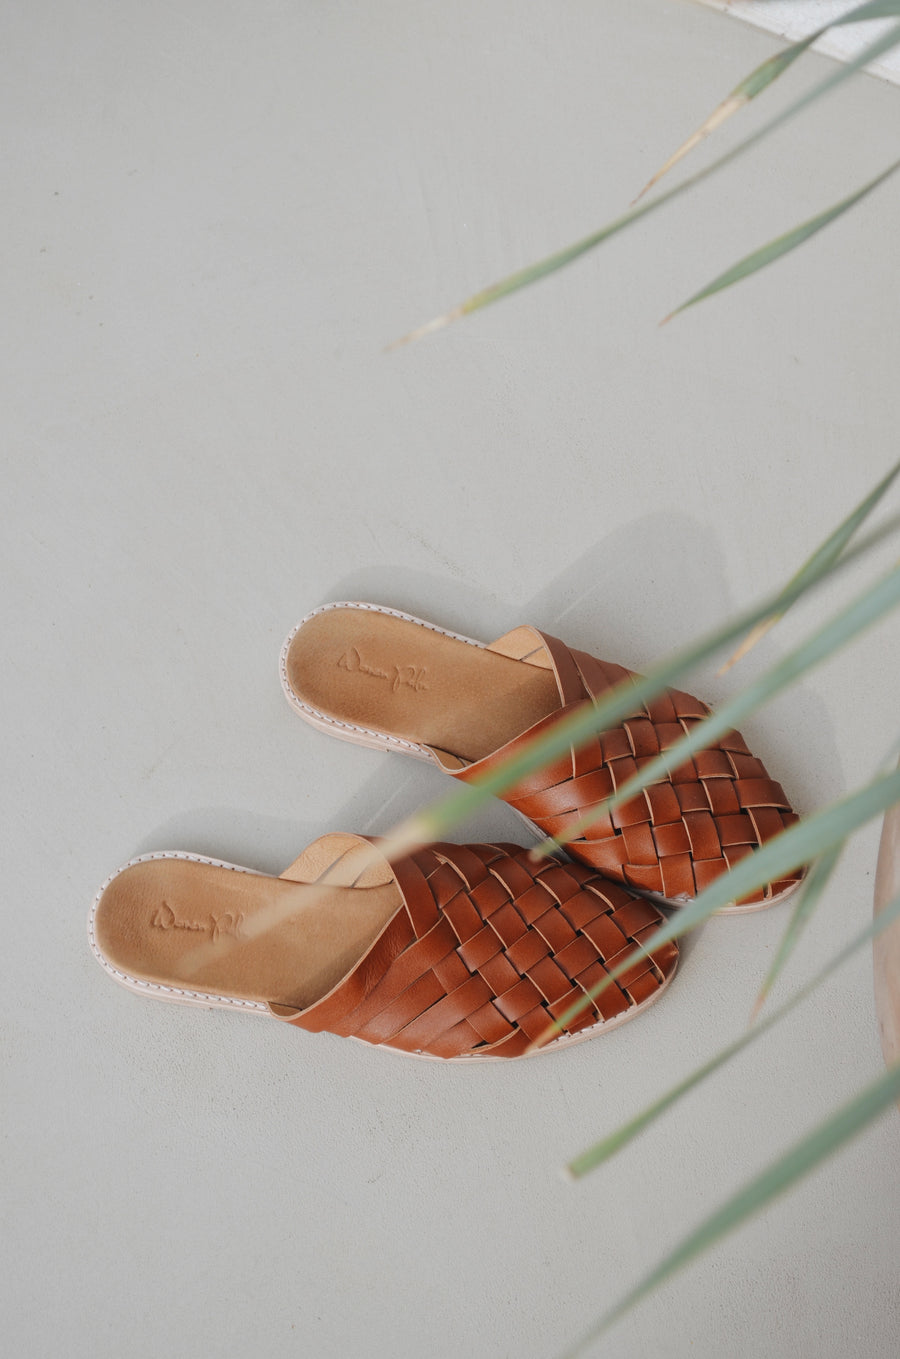 The Woven Mules